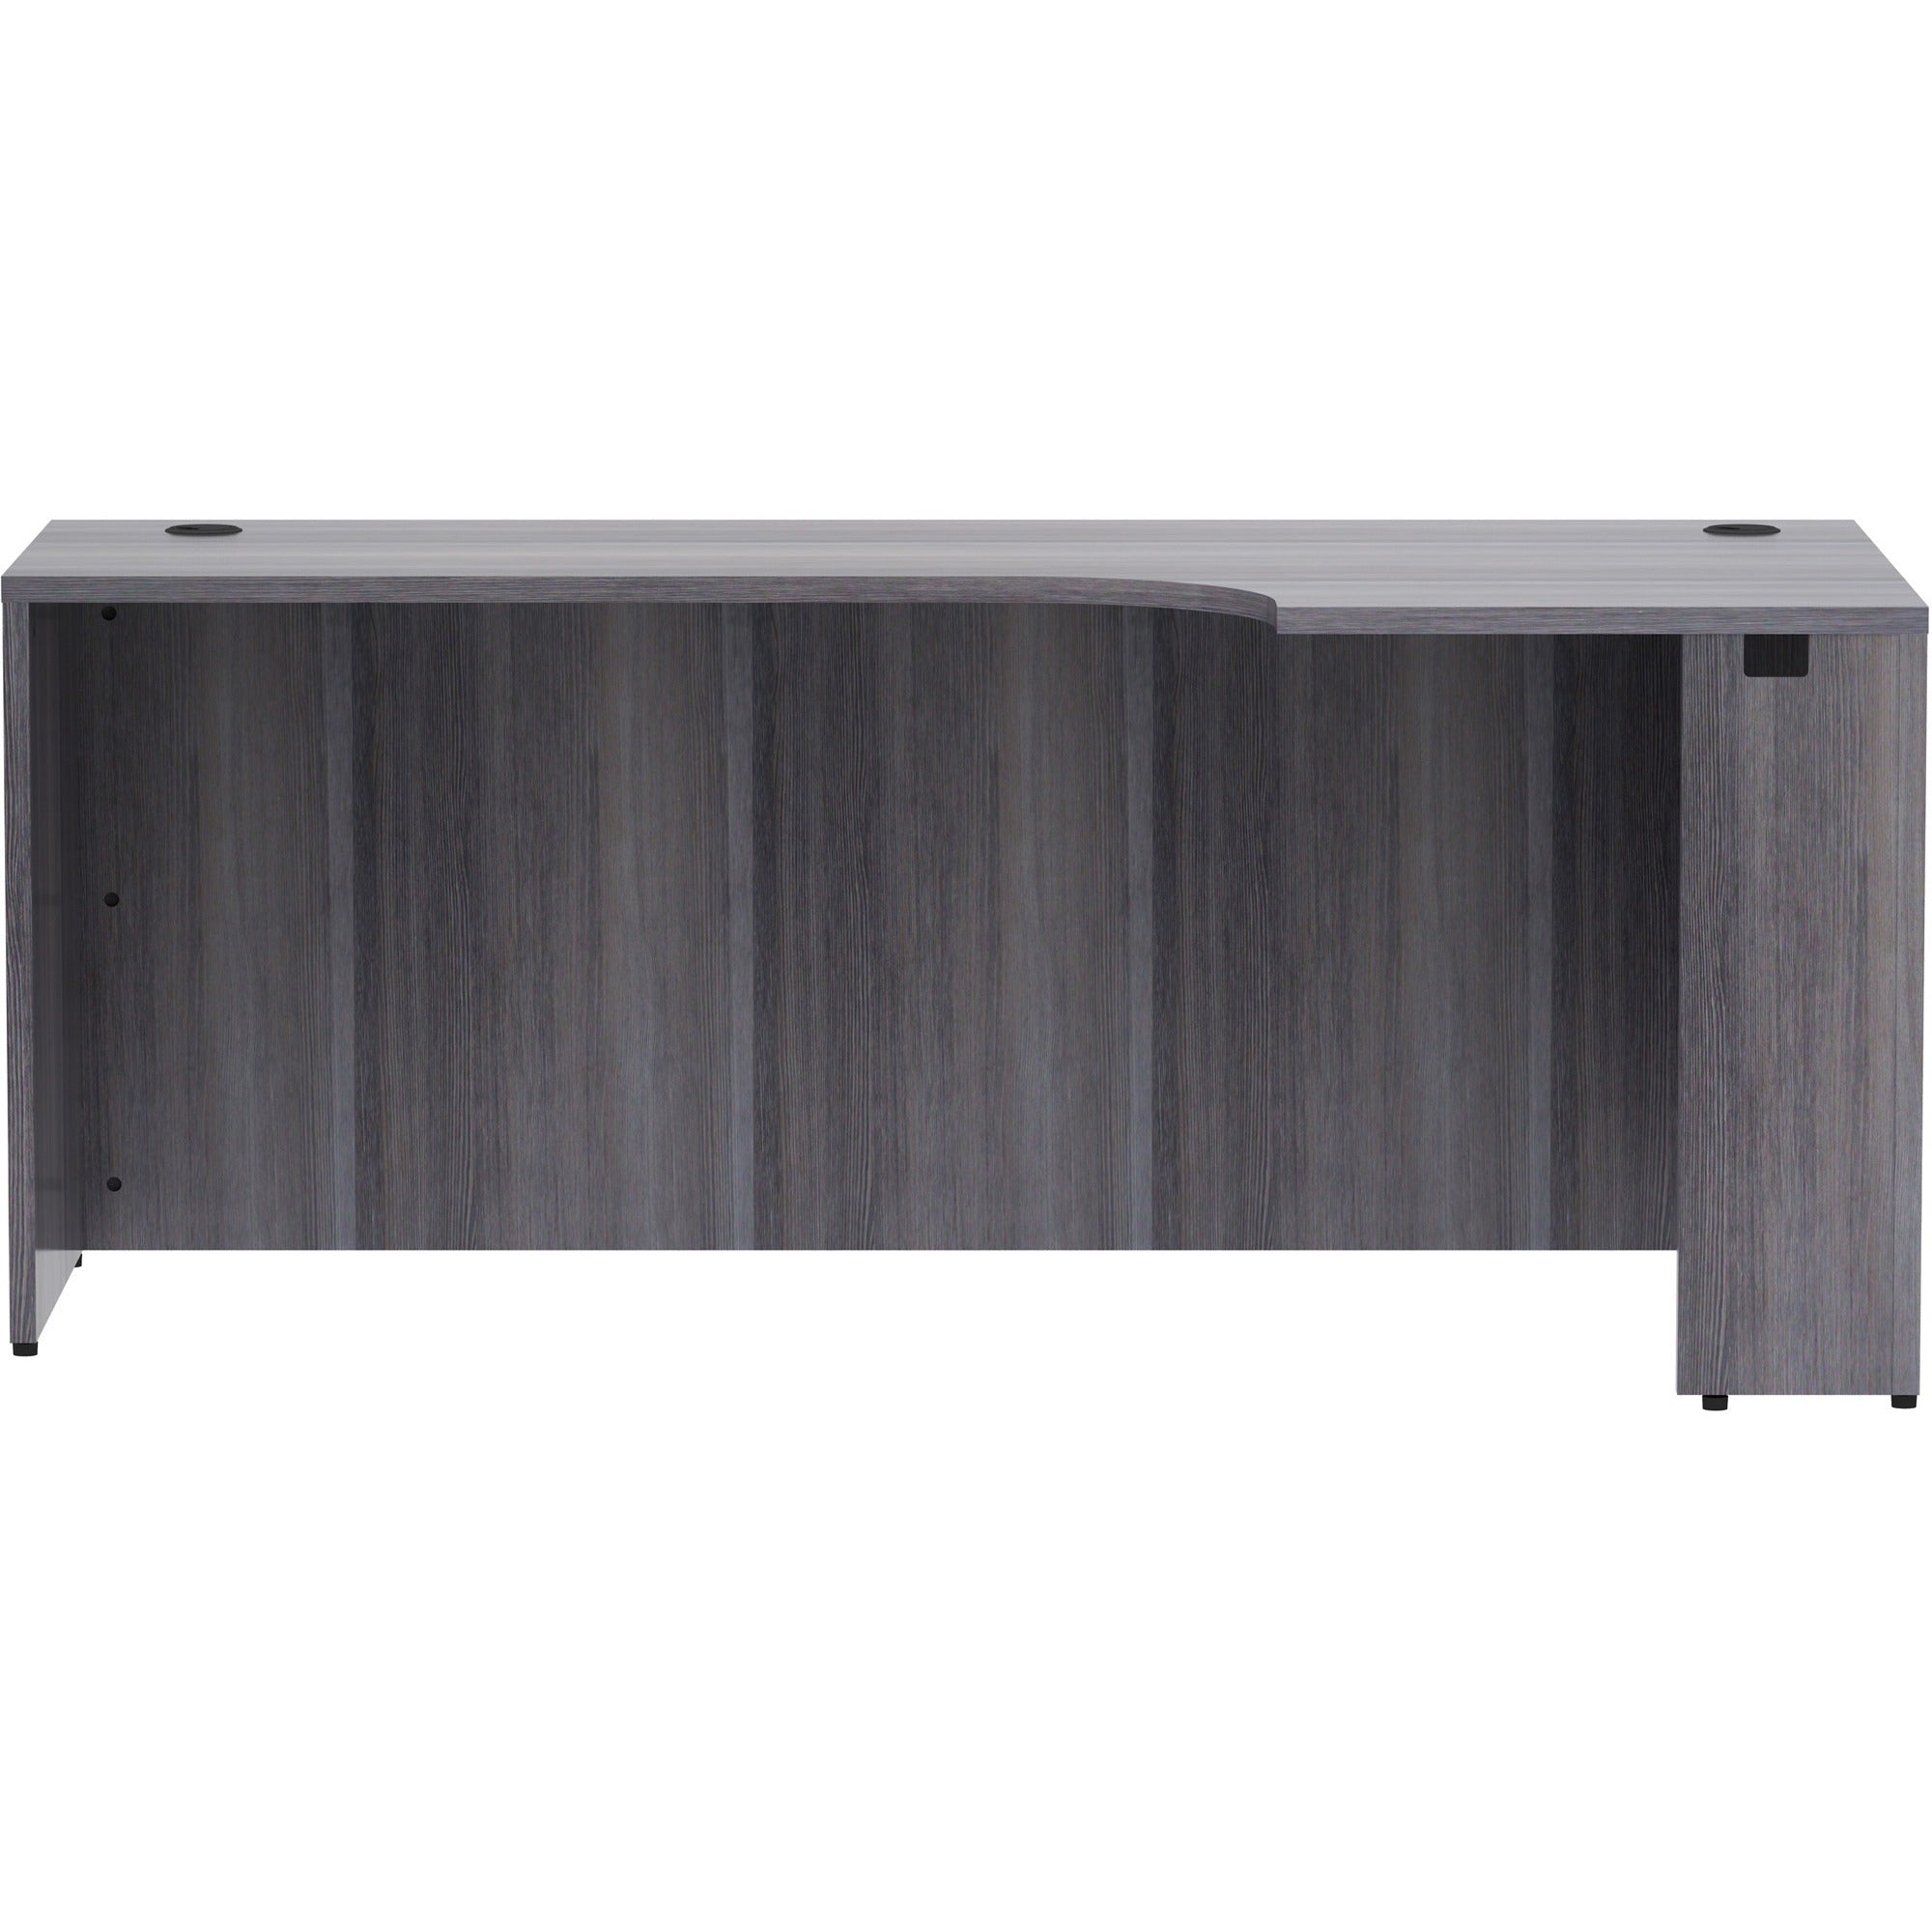 lorell-essentials-seriese-right-corner-credenza-72-x-36-x-24295-credenza-1-top-finish-weathered-charcoal-laminate_llr69599 - 2